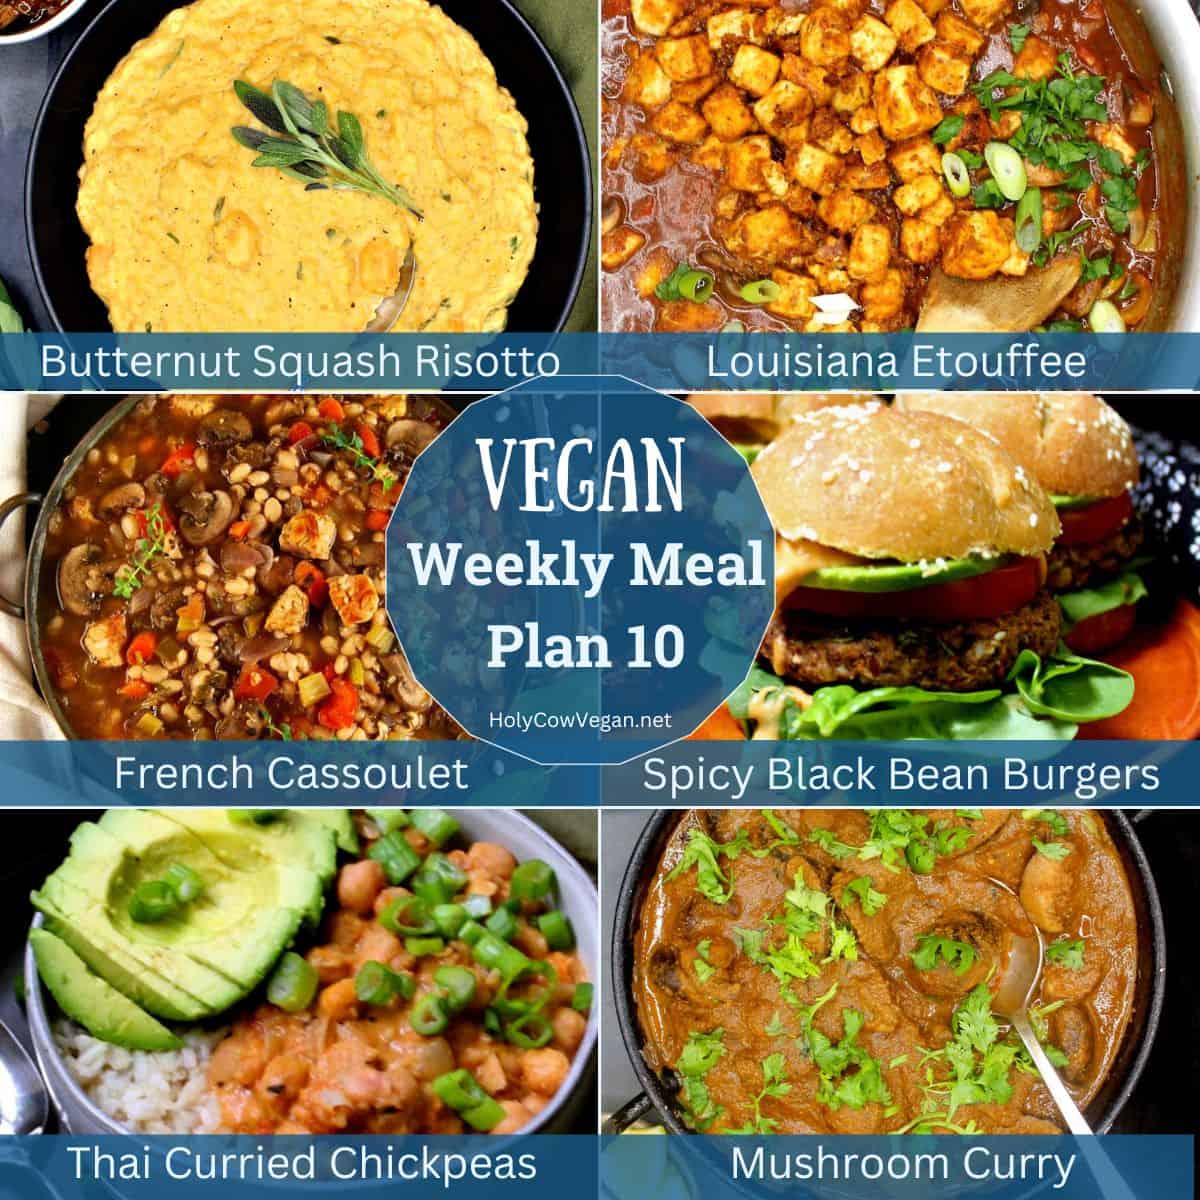 Images and names of vegan dinners with text that says "vegan weekly meal plan 10."